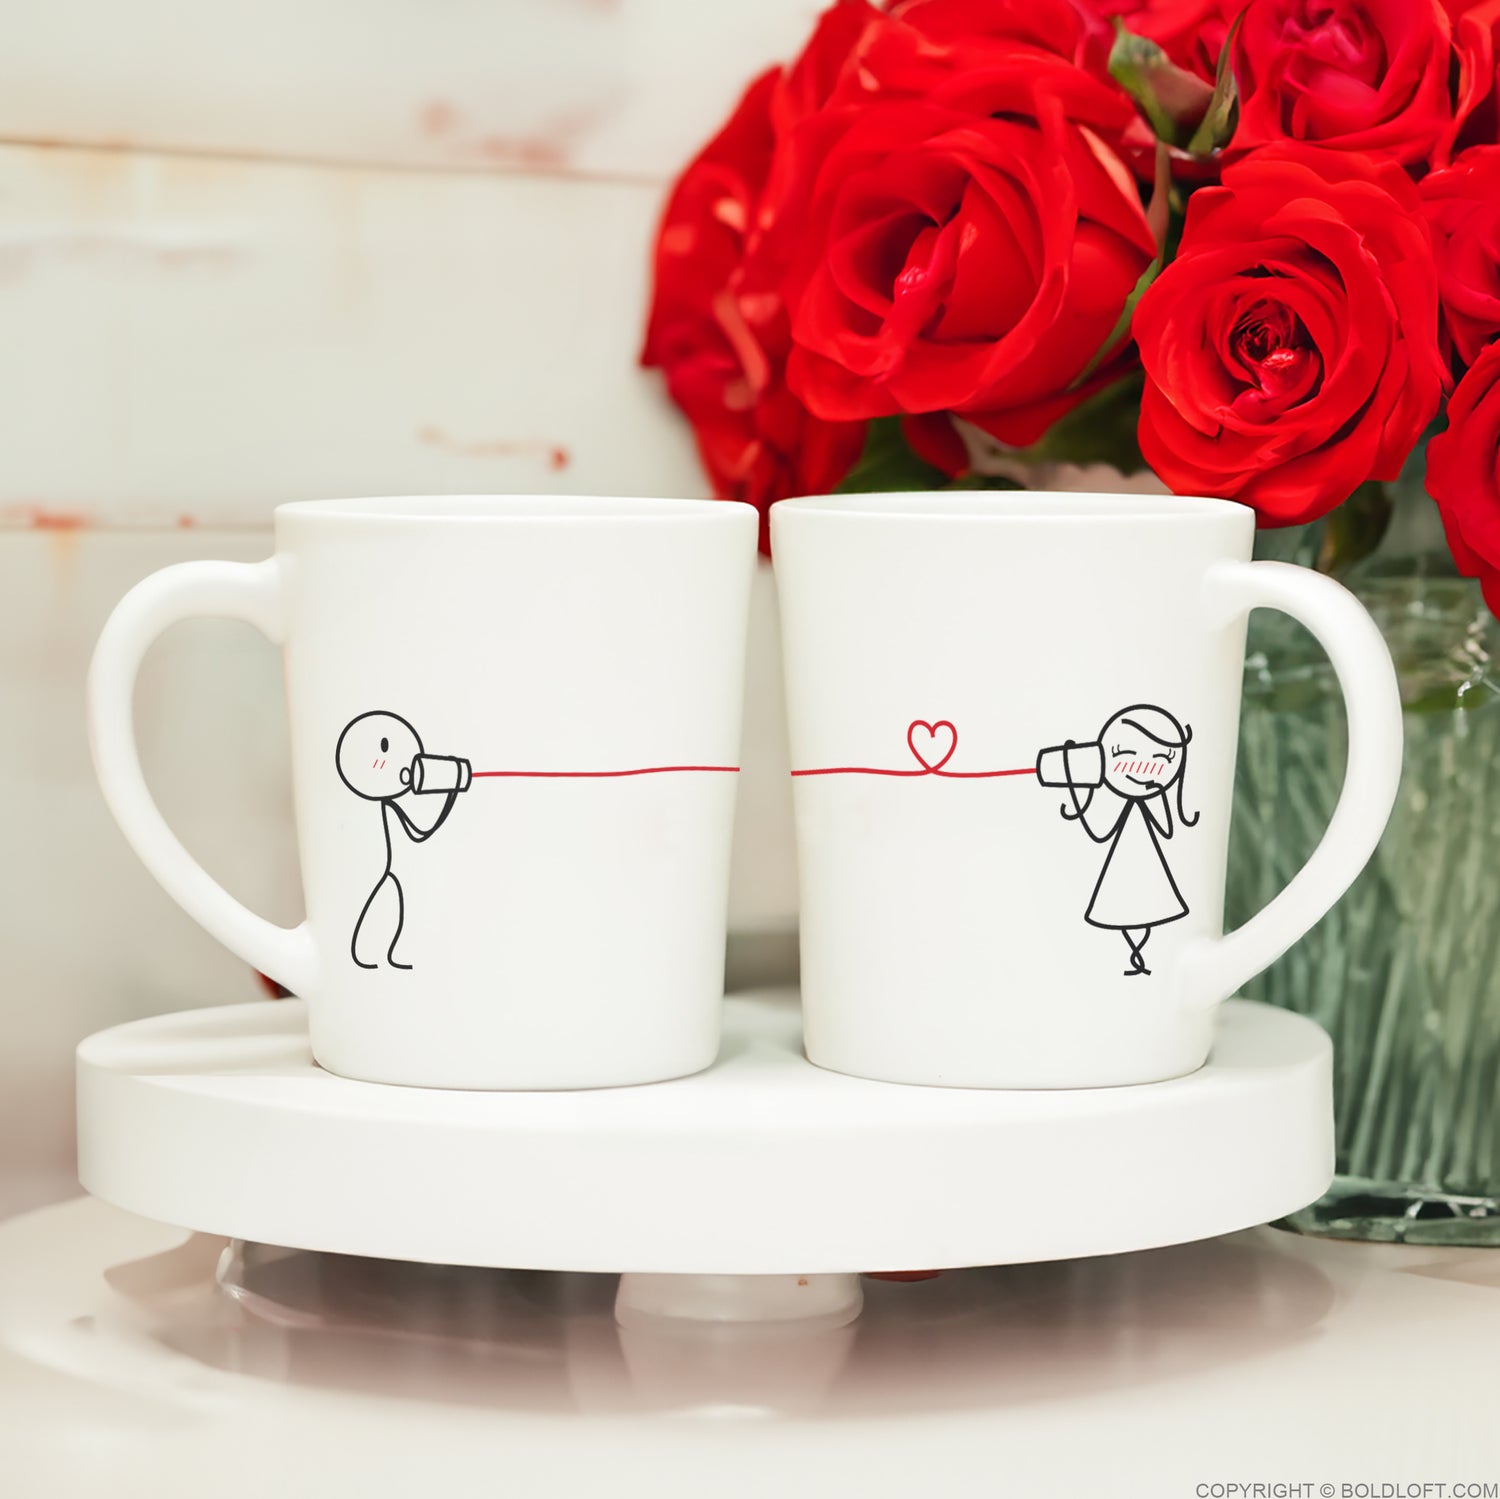 BoldLoft Say I Love You couple coffee mugs showcasing signature designs with can phone and 2 stick figures